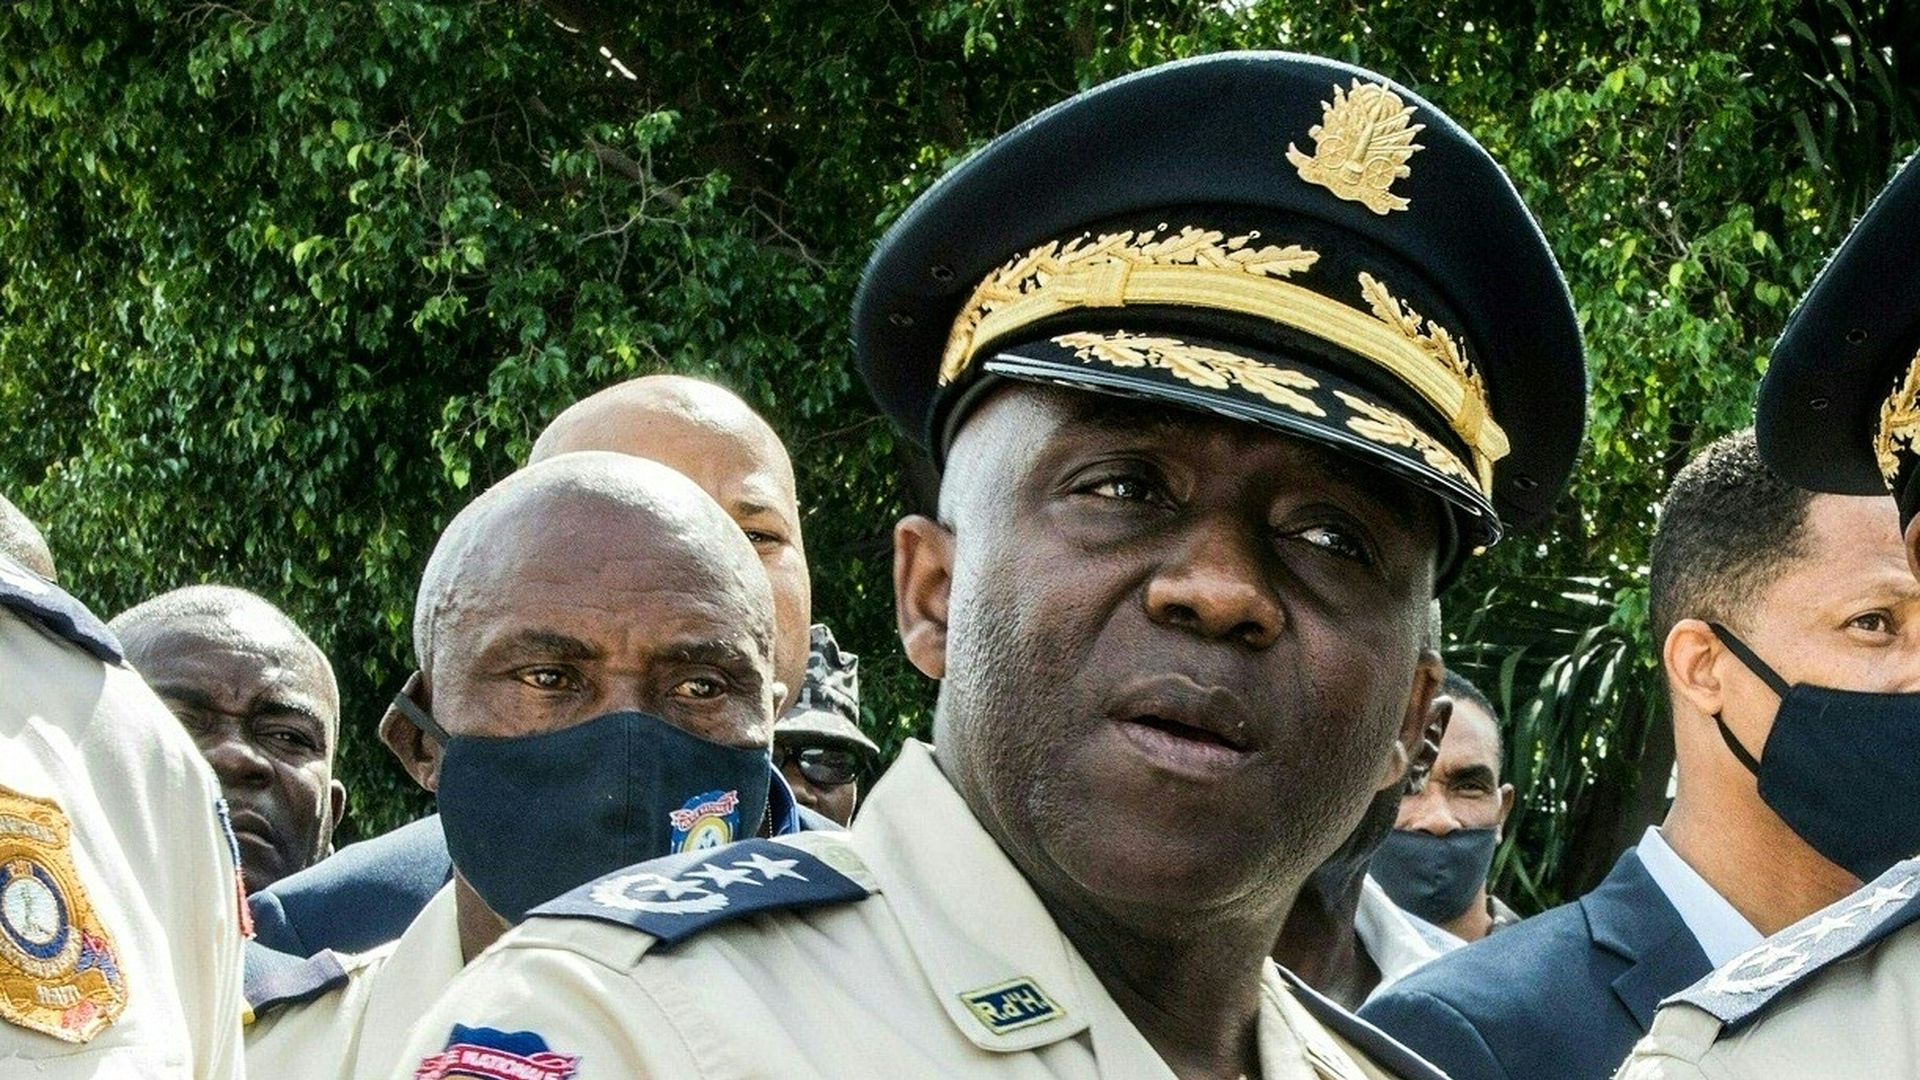 Chief of National Police of Haiti (PNH), Léon Charles looks on during a ceremony in Port-au-Prince, Haiti on November 16, 2020. 